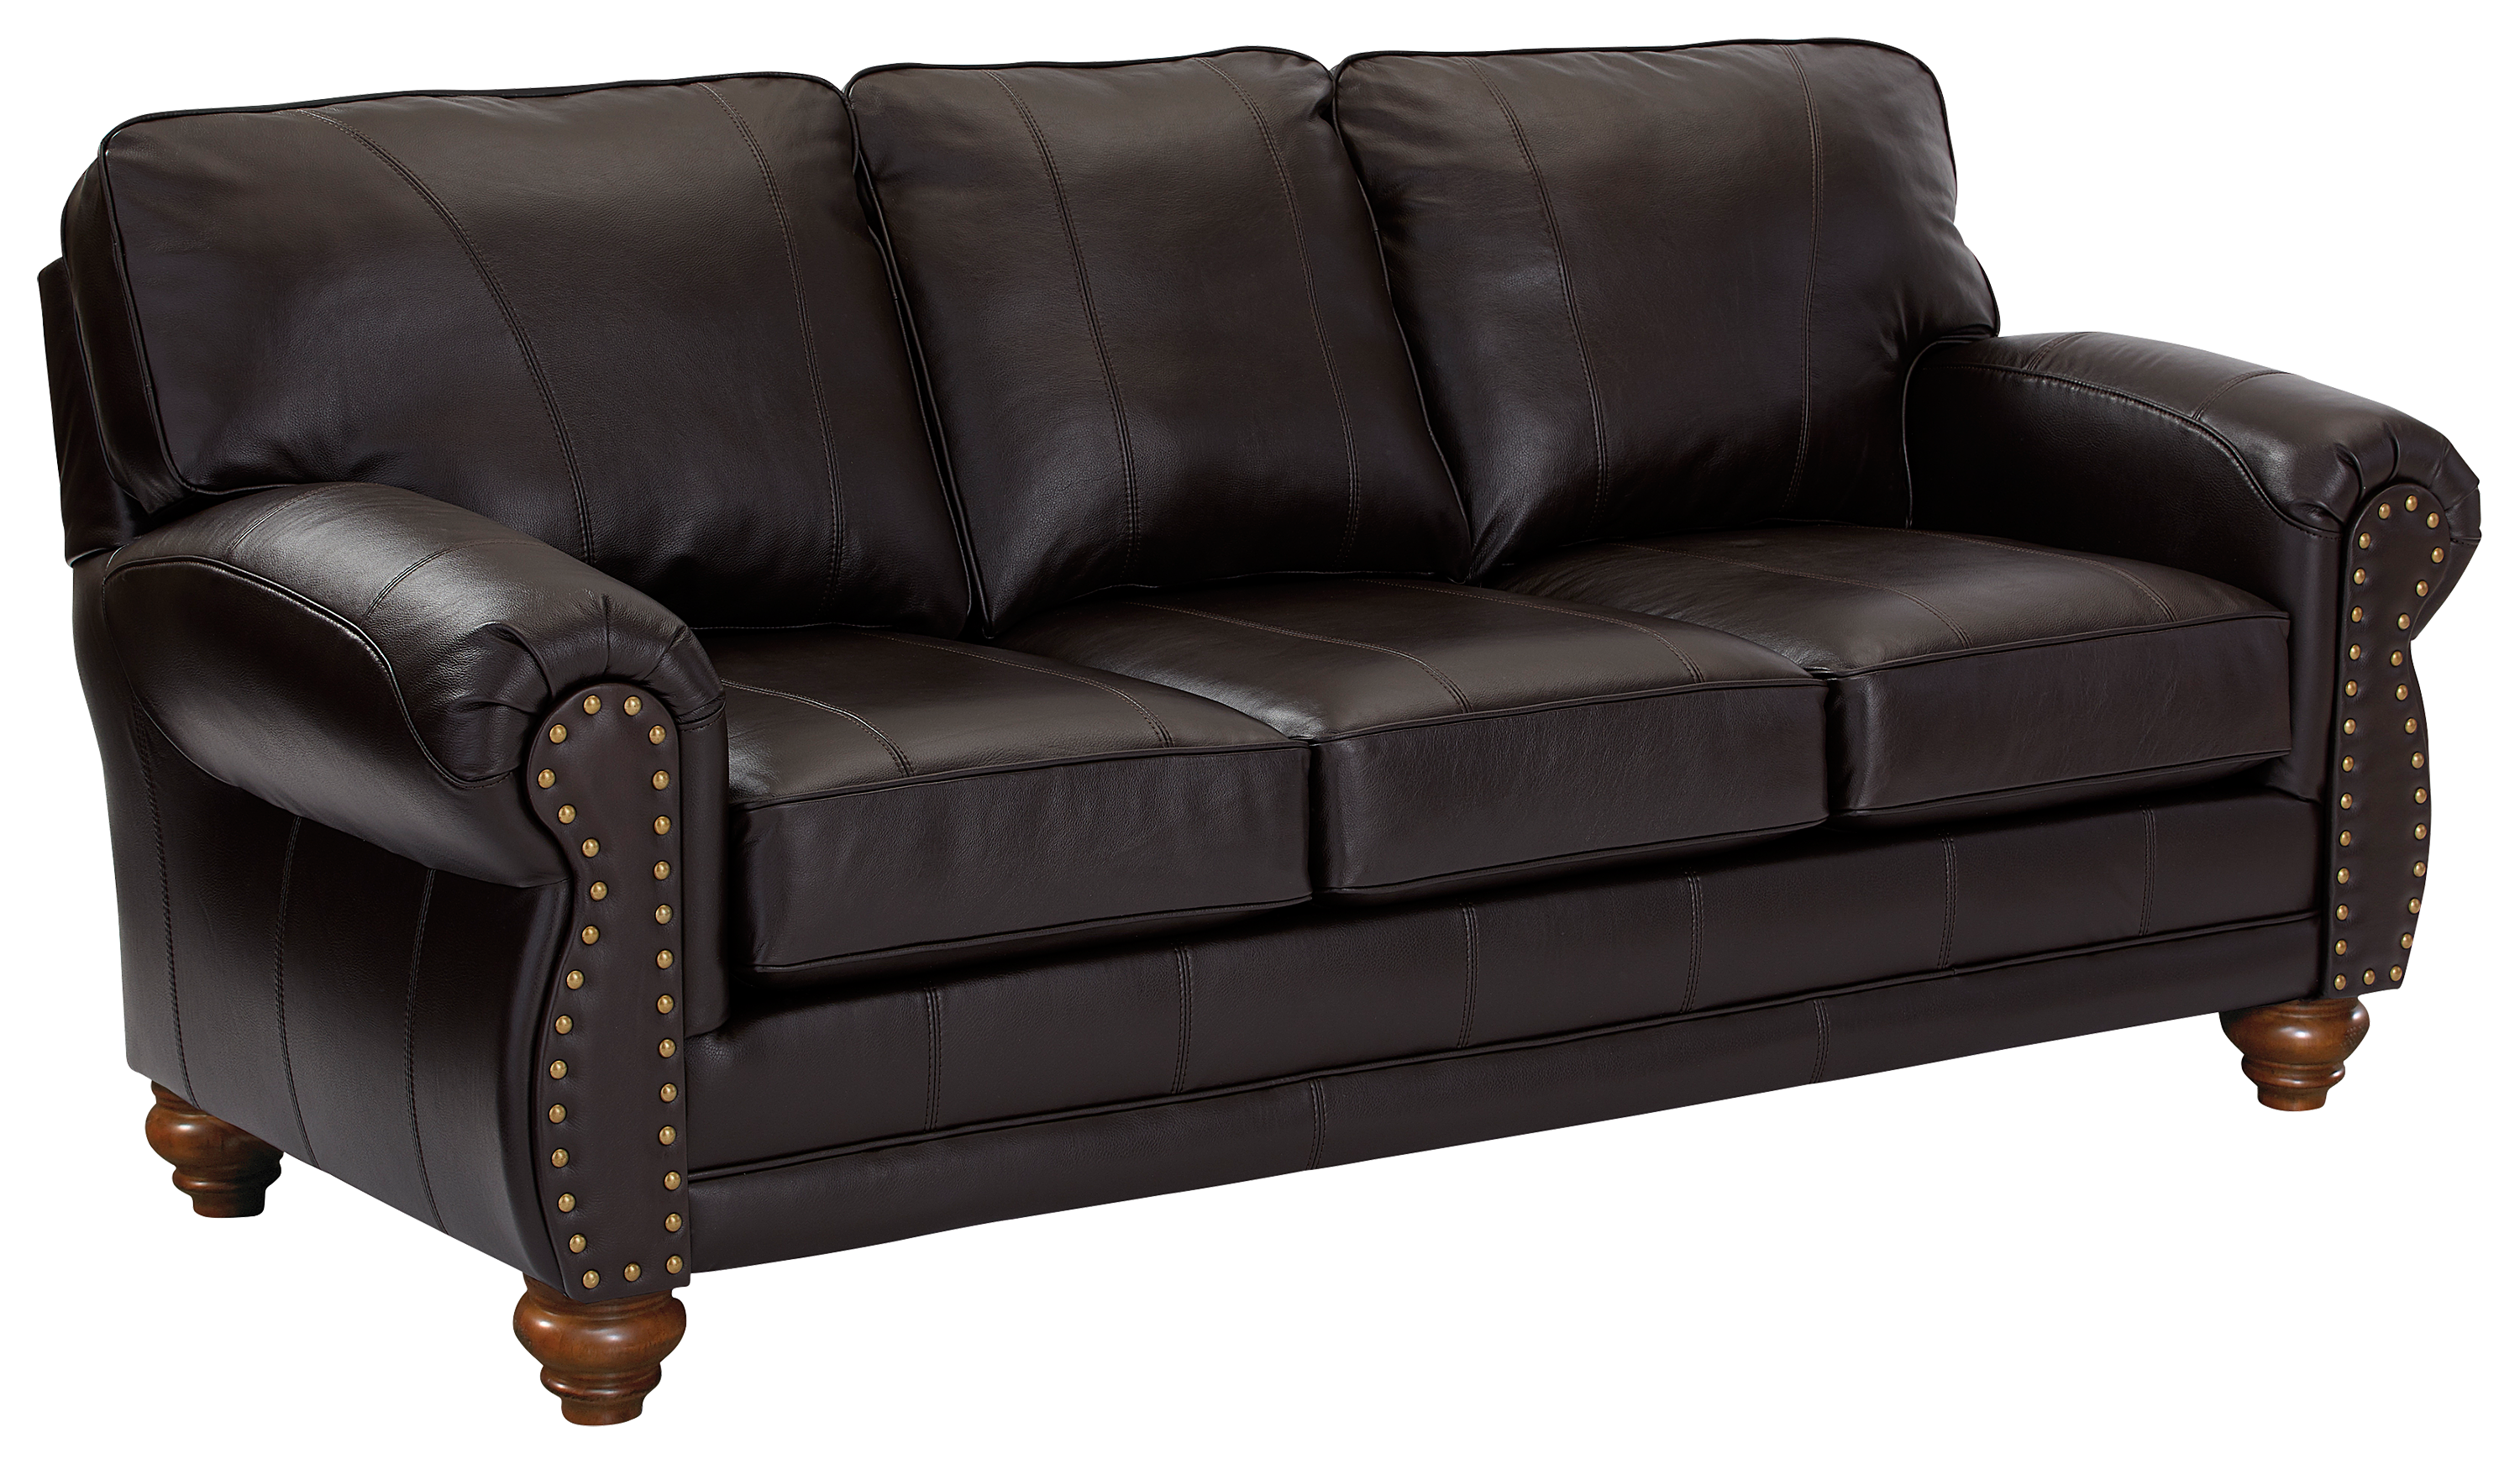 Best Home Furnishings Noble Furniture Collection Stationary Sofa - Coffee